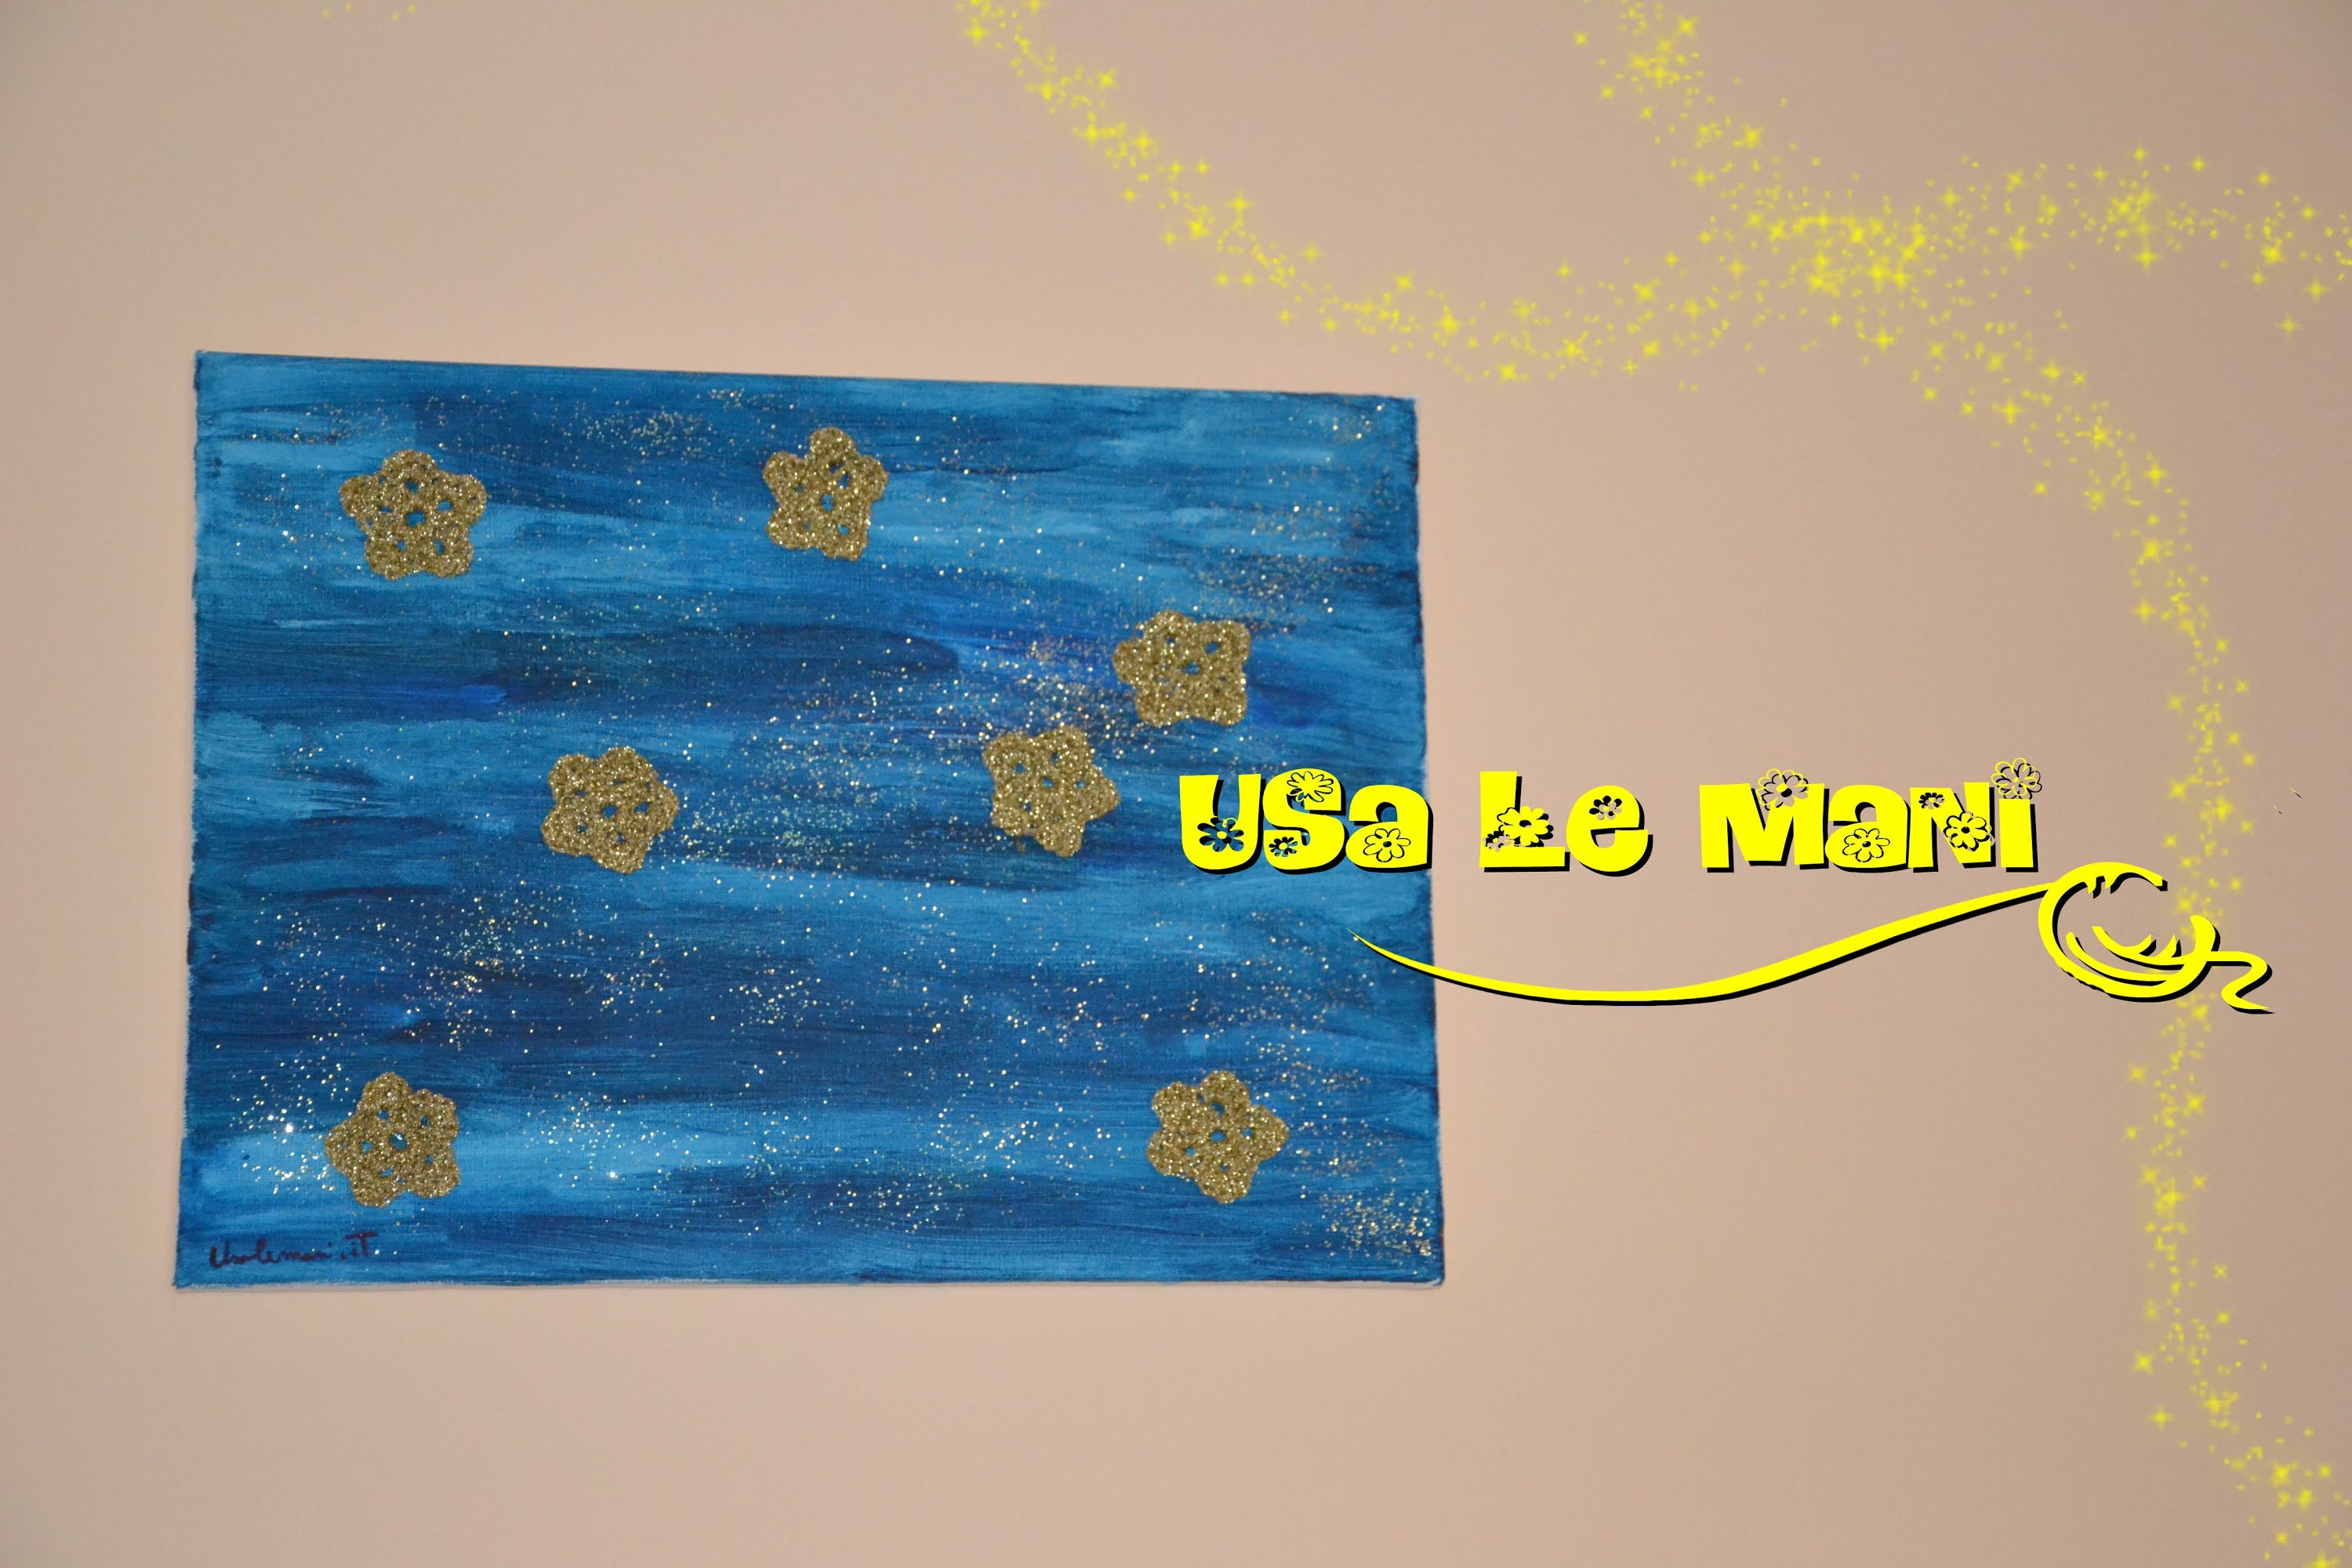 Quadro cielo stellato a uncinetto. starry sky crocheted painting